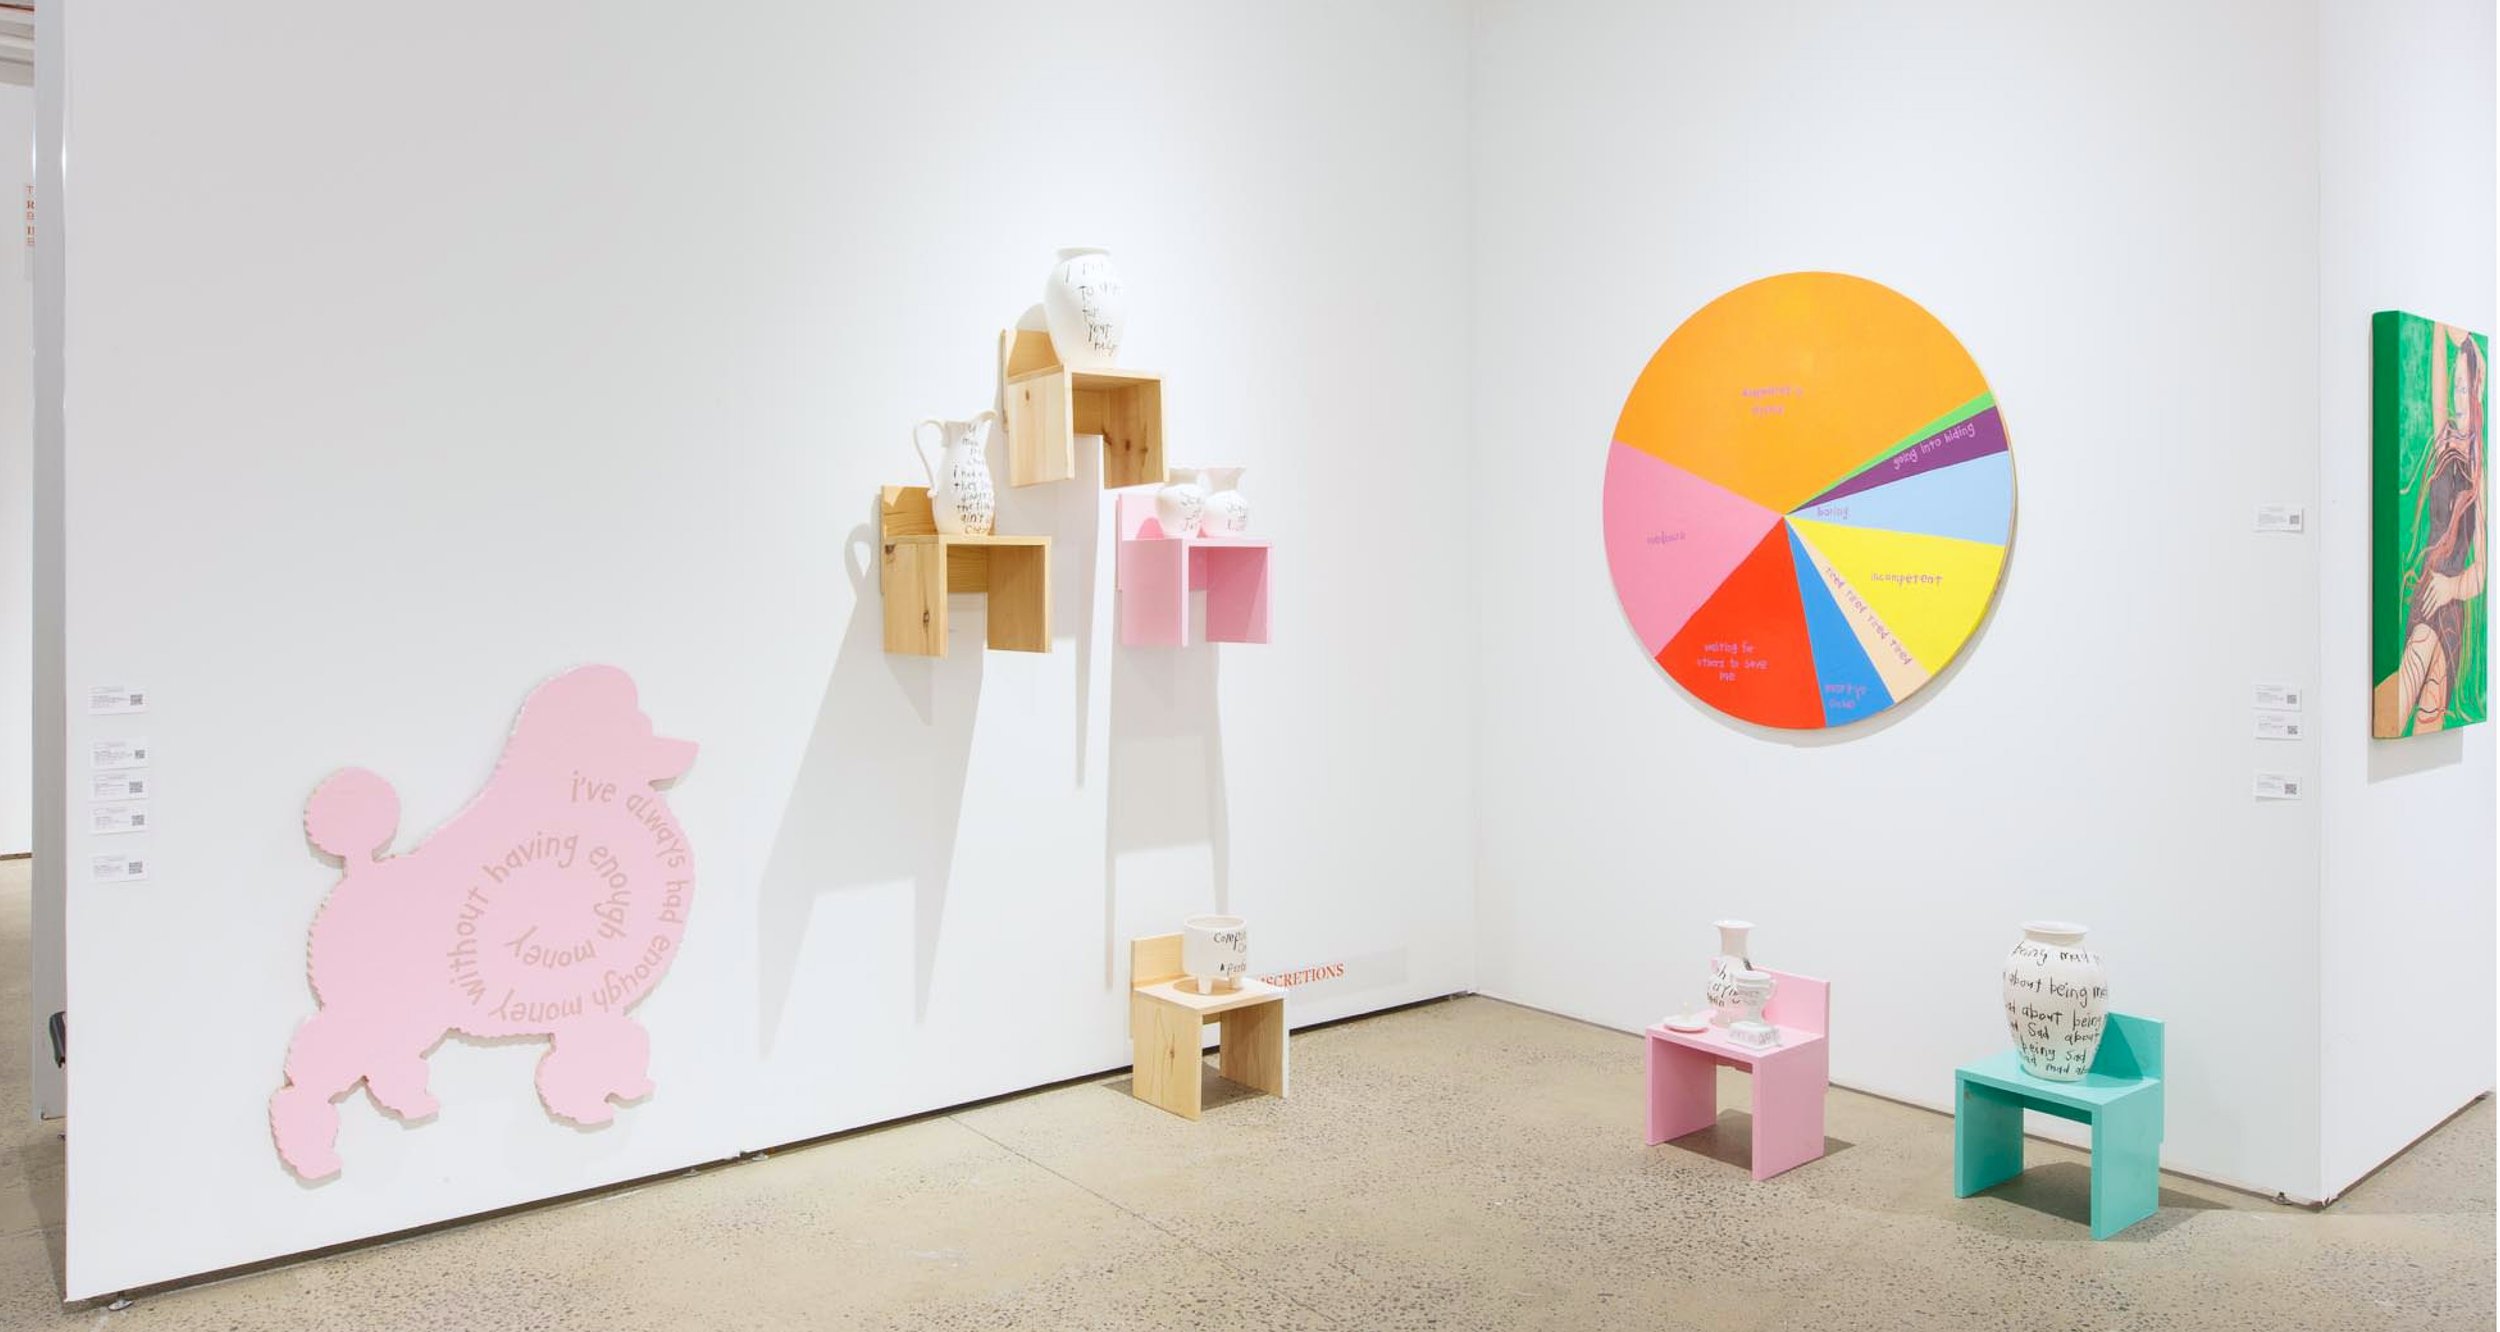  Installation view of works by Cary Leibowitz at New Discretions (New York, NY) space at Future Fair. © David Willems Photography 